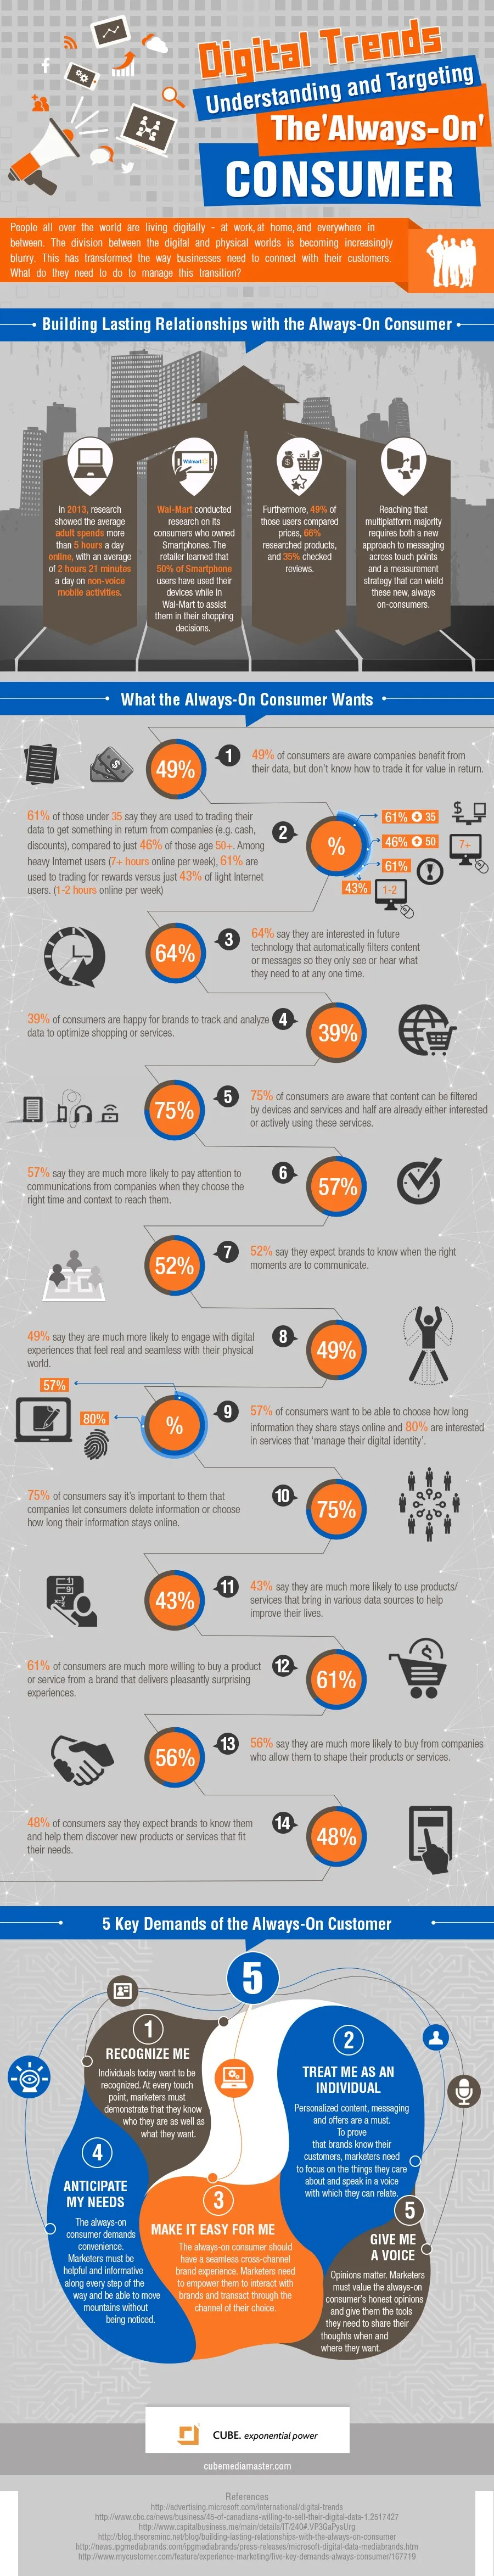 This infographic explains the latest digital trends to target consumers effectively